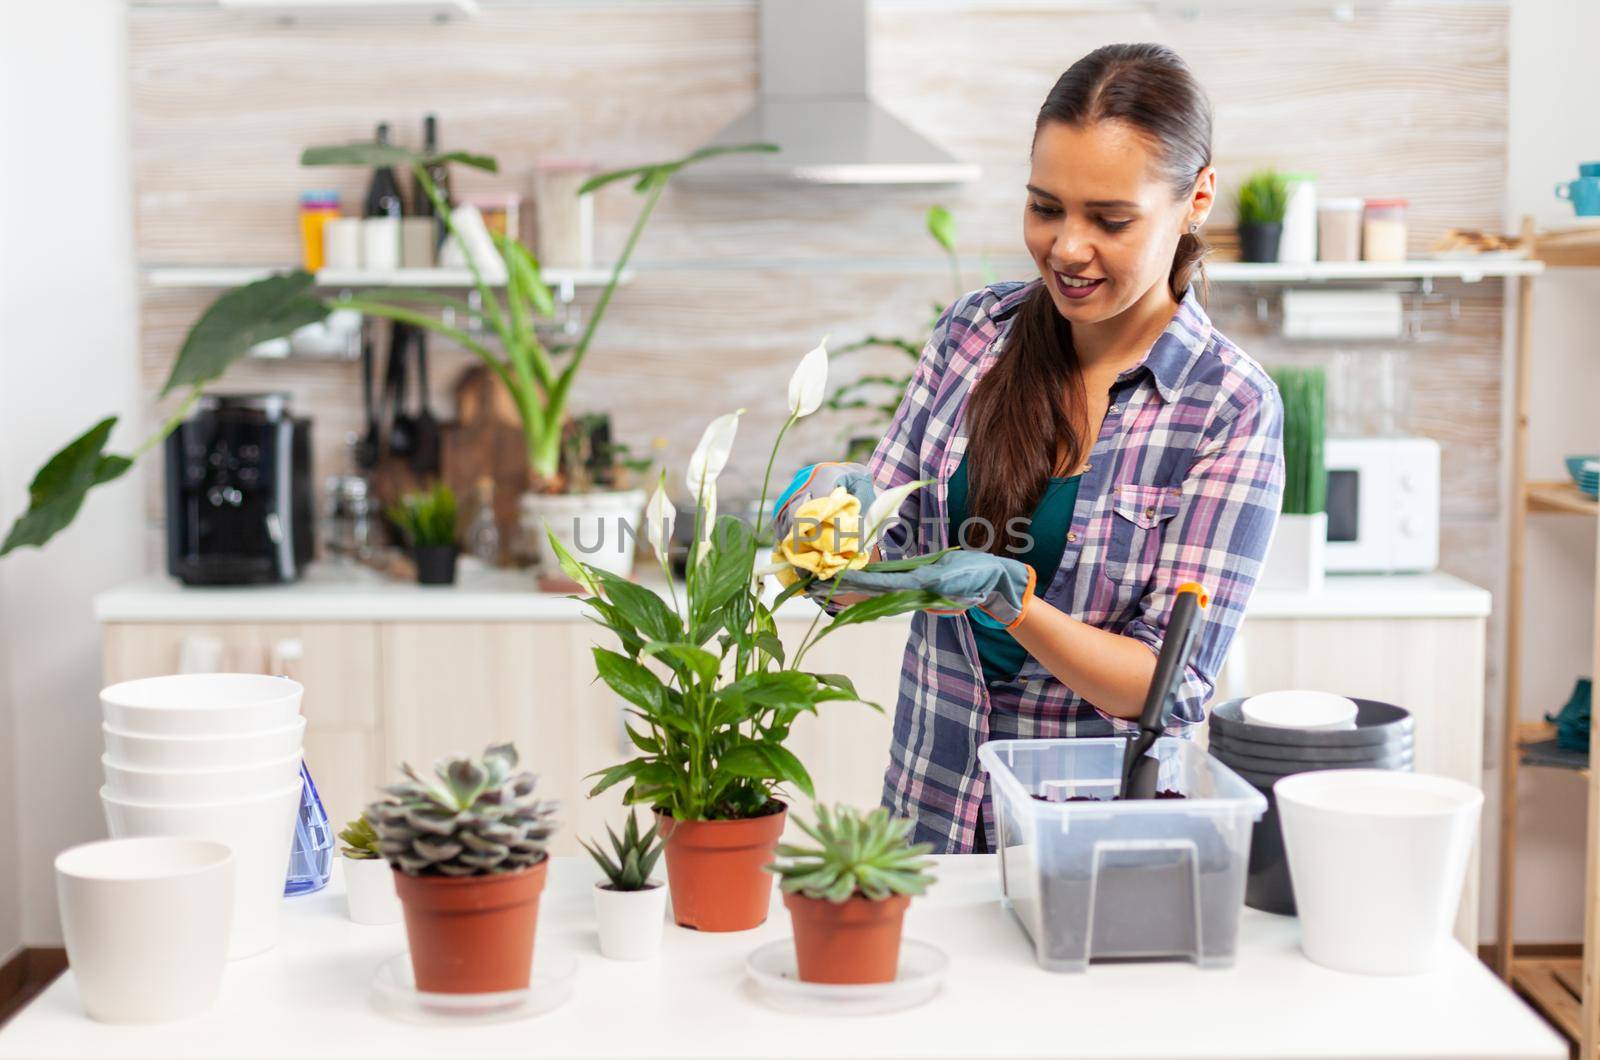 Cheerful woman taking care of the flowers at home in cozy kitchen. Using fertil soil with shovel into pot, white ceramic flowerpot and plants prepared for replanting for house decoration caring them